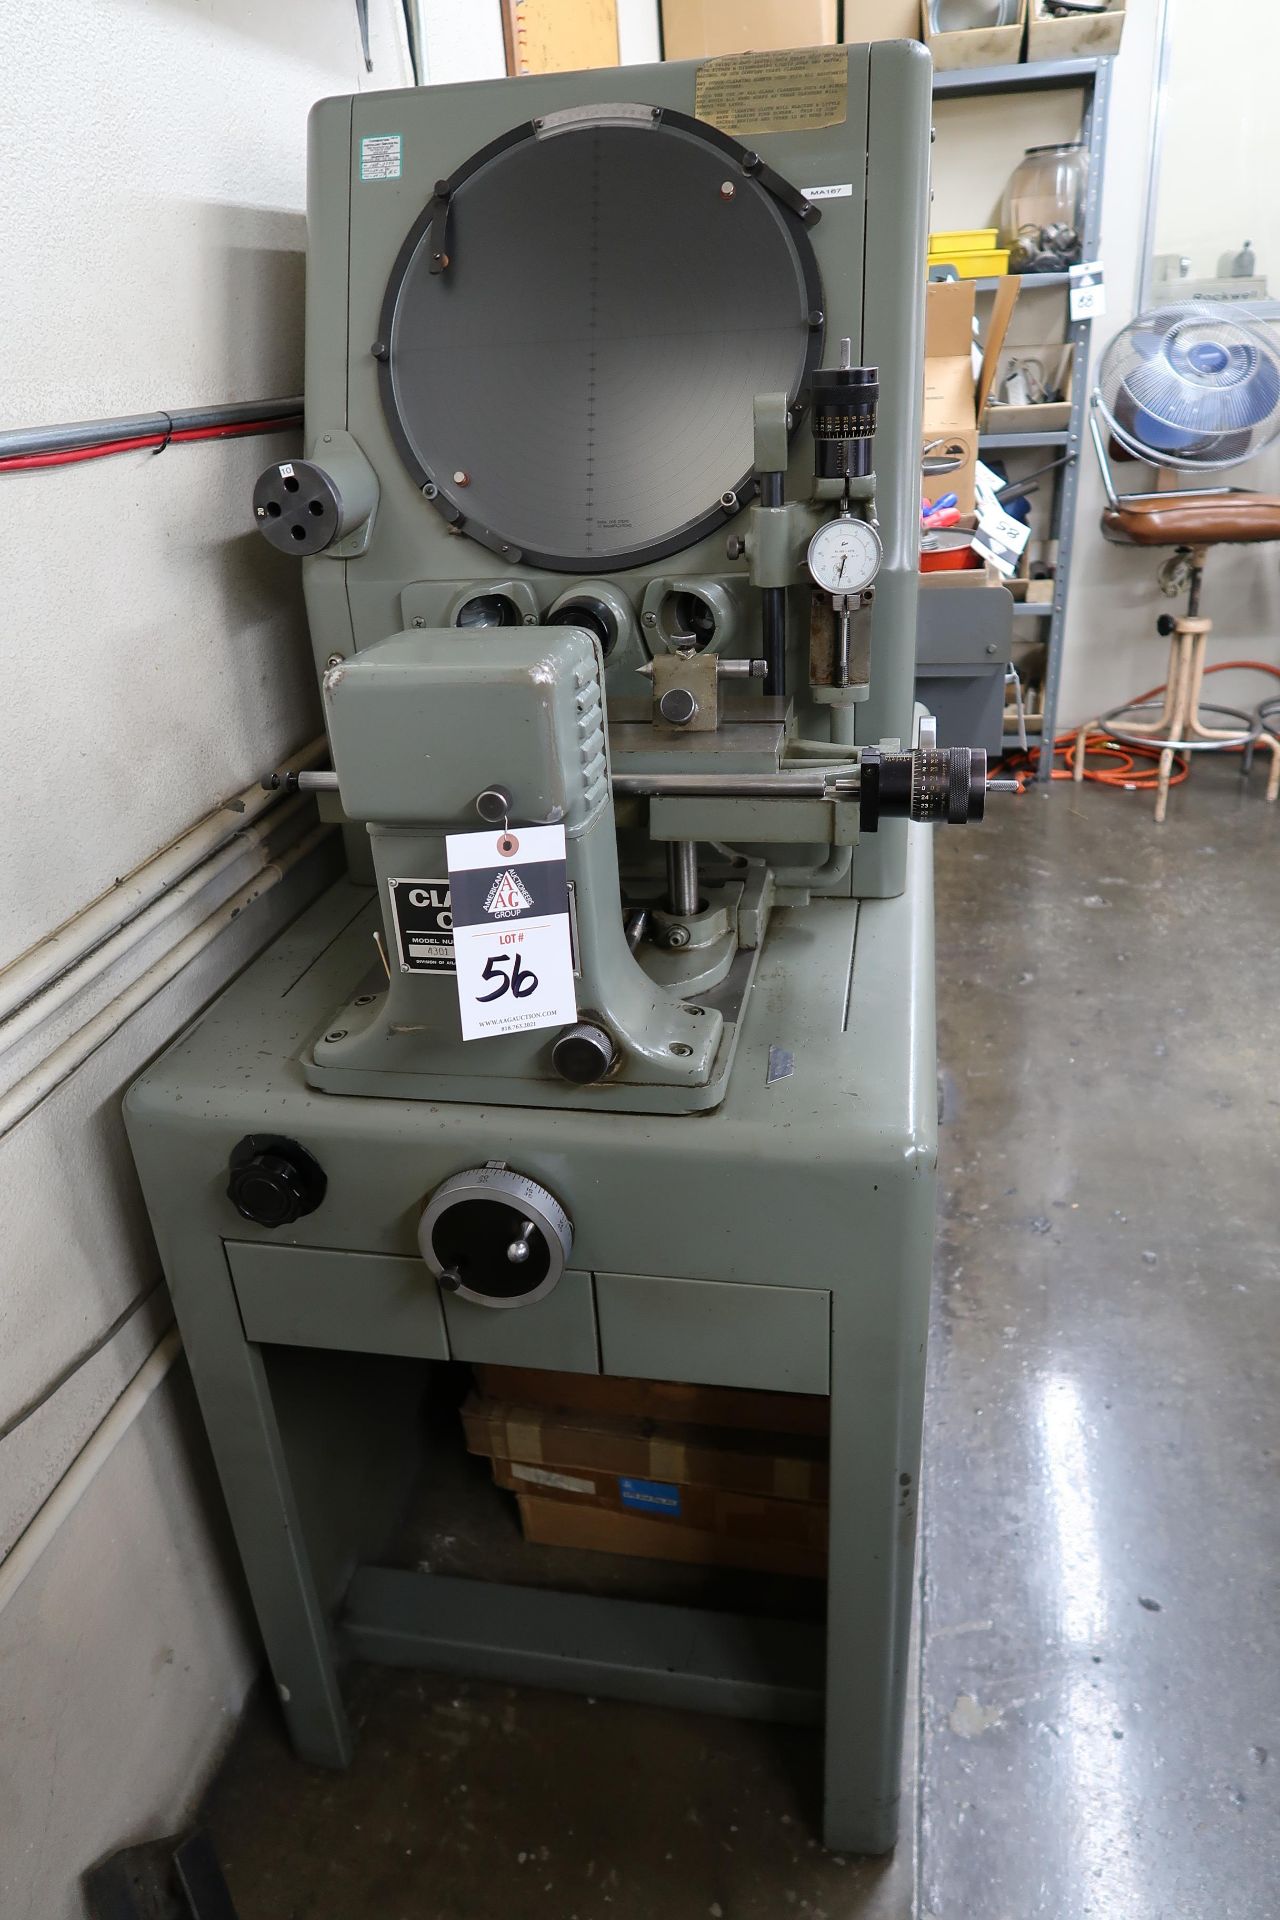 Clausing Covel mdl. 4301 14" Optical Comparator s/n 14B-3340 w/ Micrometer Readouts, Surface and